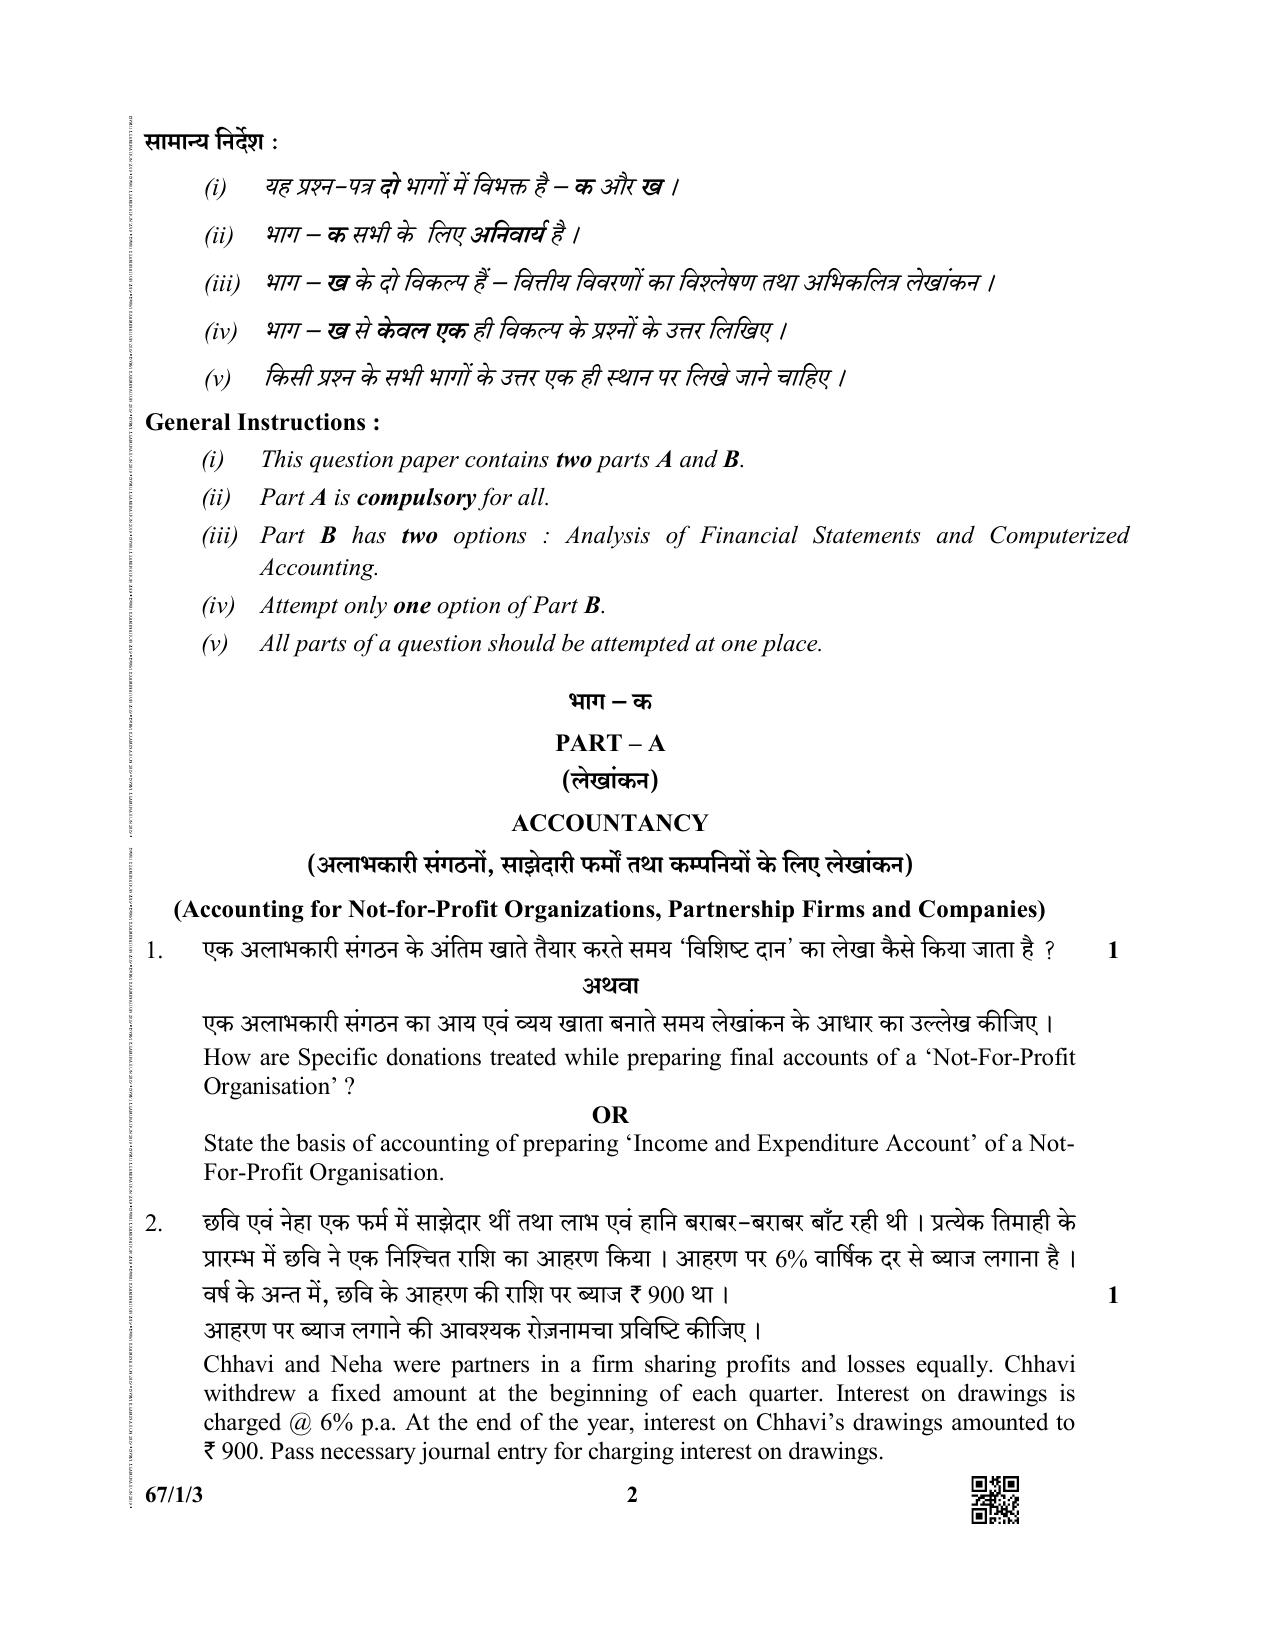 CBSE Class 12 67-1-3  (Accountancy) 2019 Question Paper - Page 2